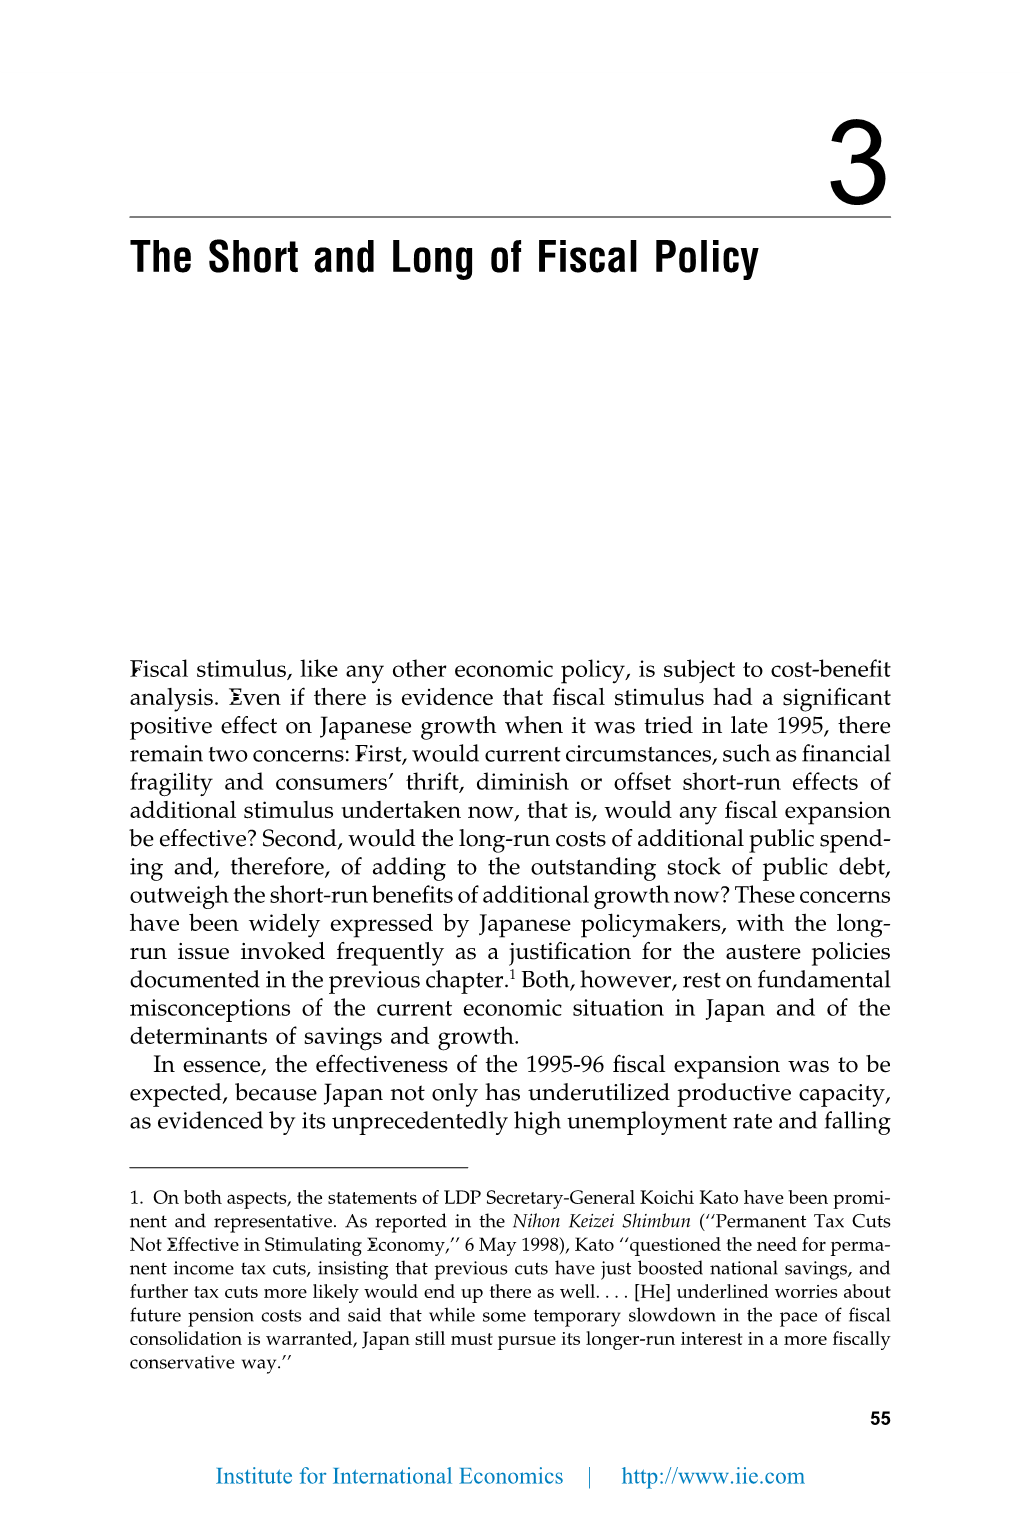 The Short and the Long of Fiscal Policy